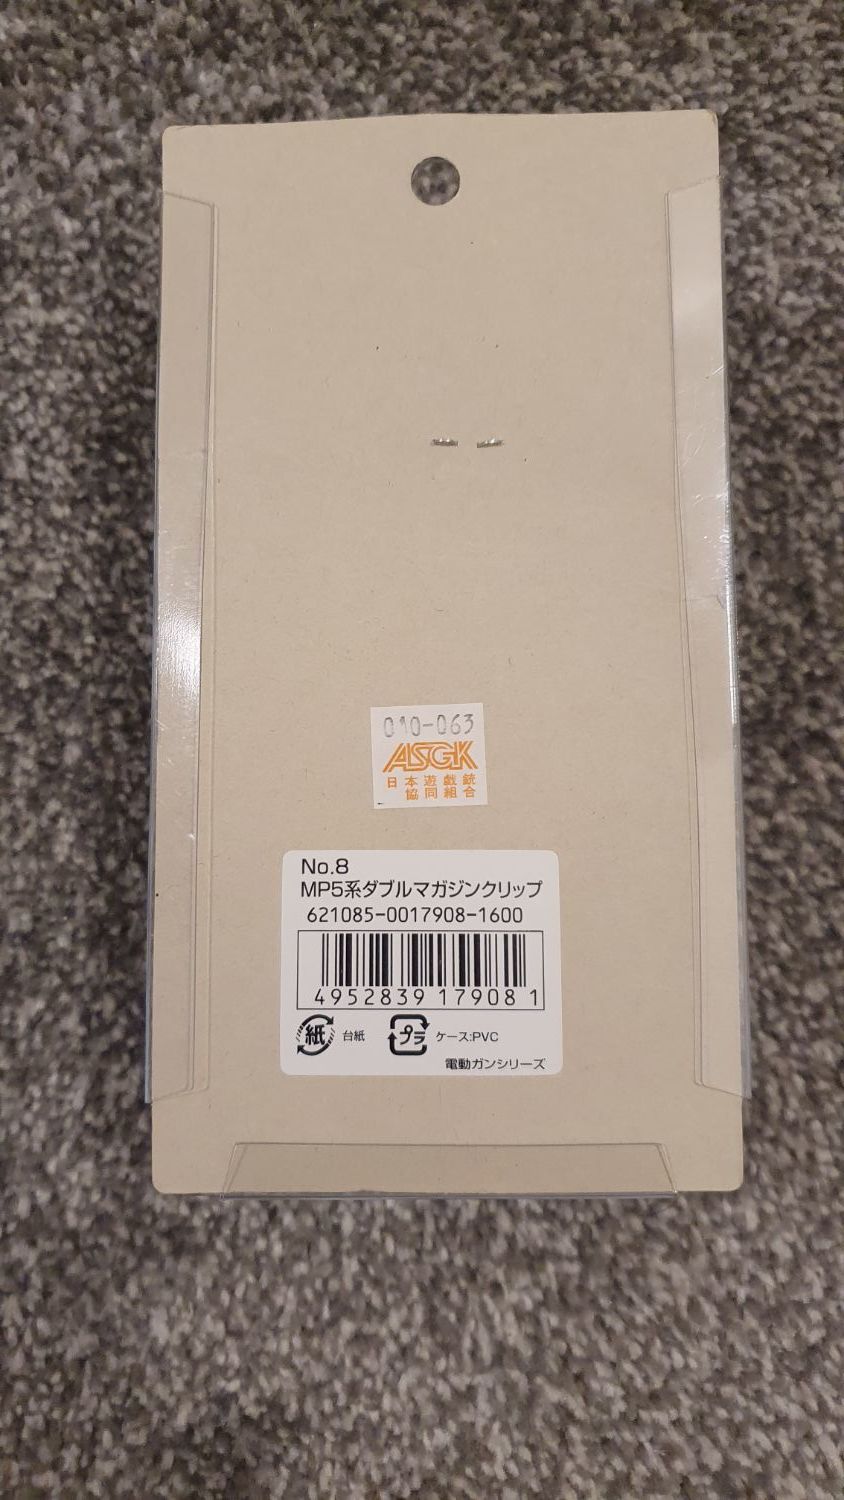 Tokyo Marui MP5 Magazine Clamp, New In Box - Parts - Airsoft Forums UK